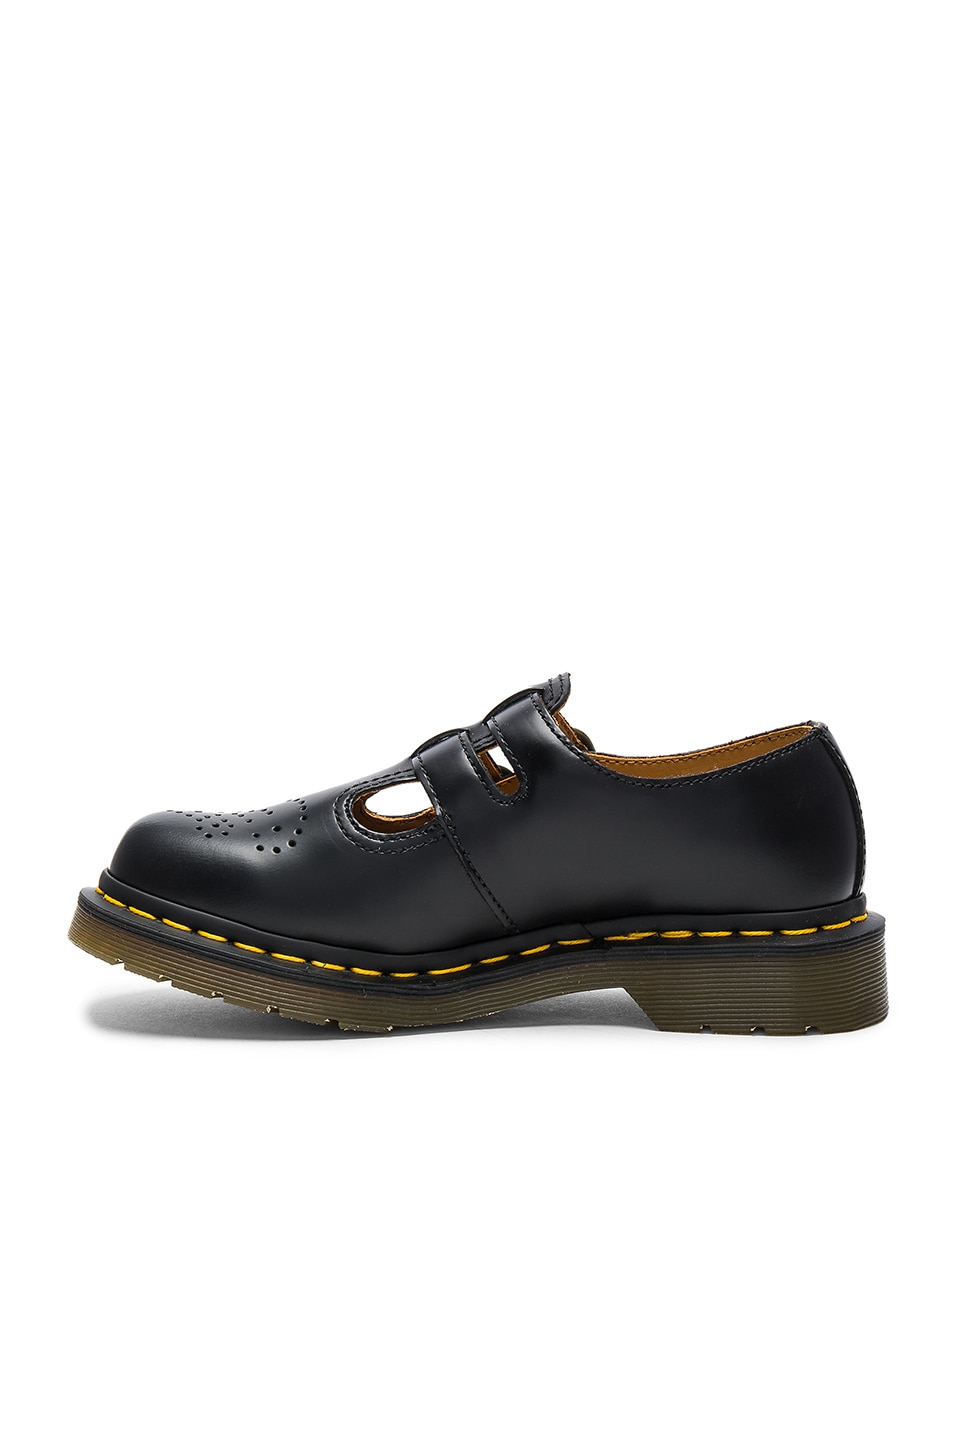 Dr. Martens Women's 8065 Patent Leather Mary Jane Shoes In Multicolor ...